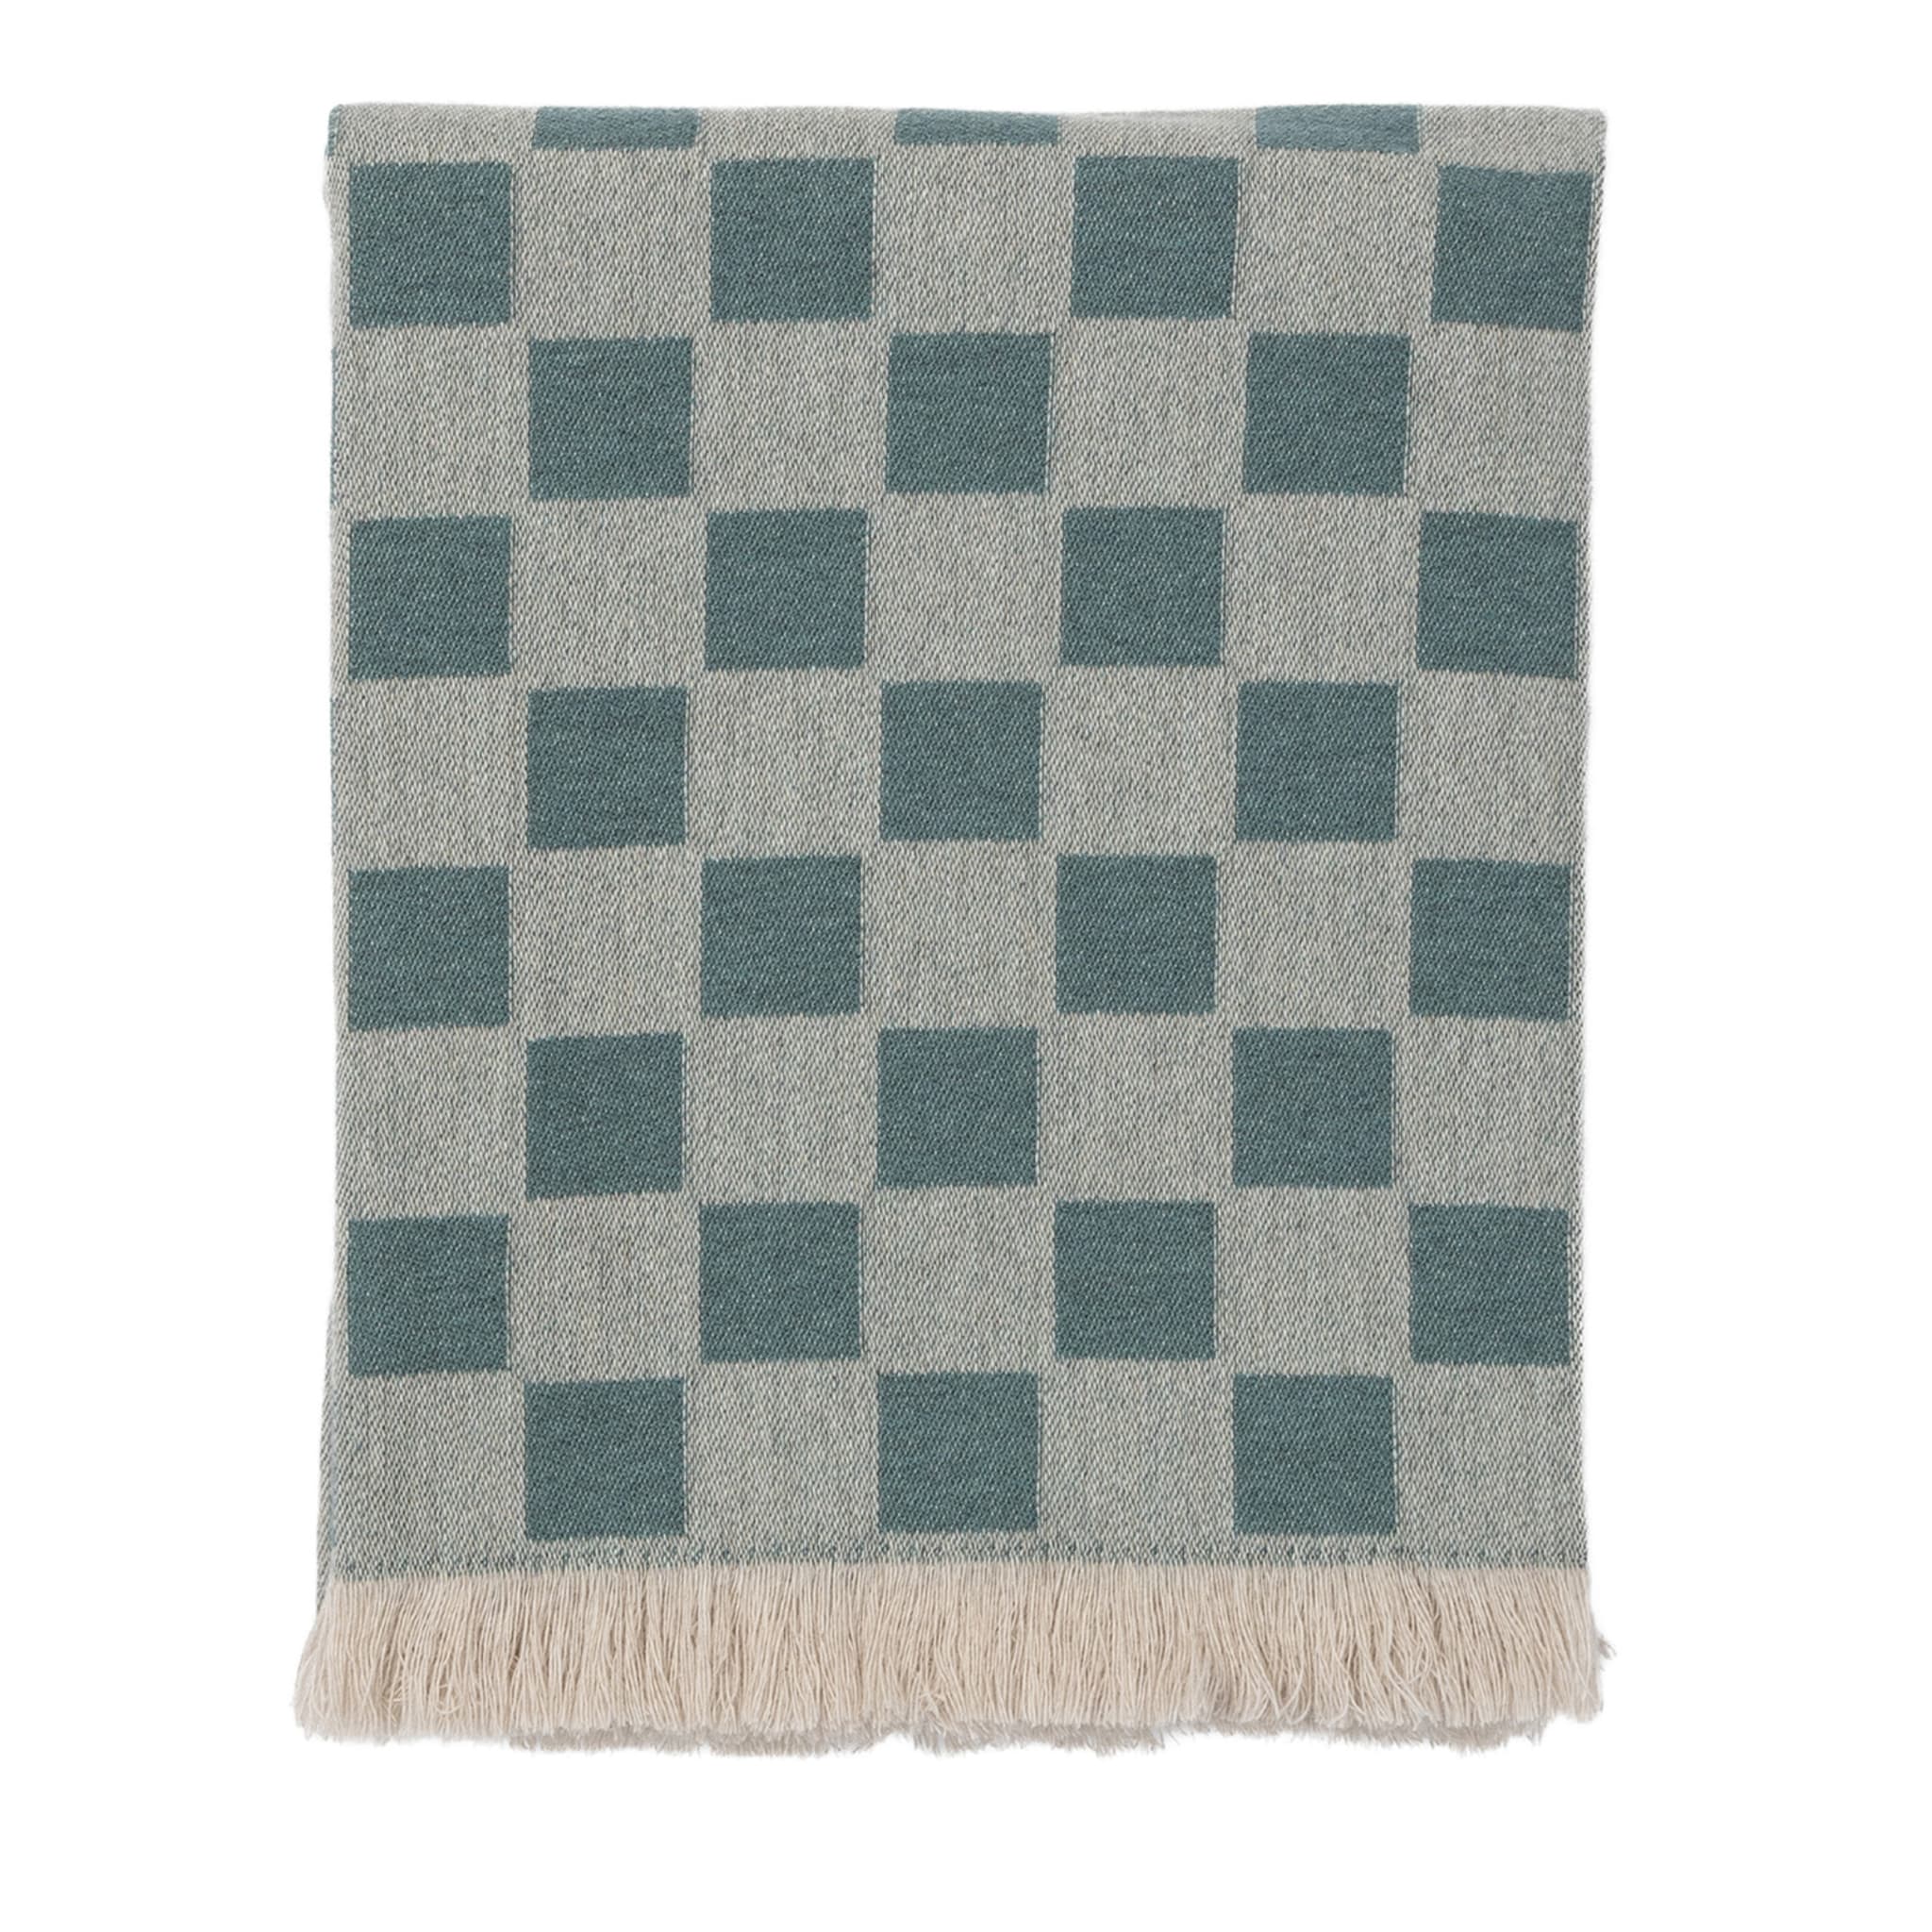 Fringed Chessboard-Patterned Green Blanket - Main view